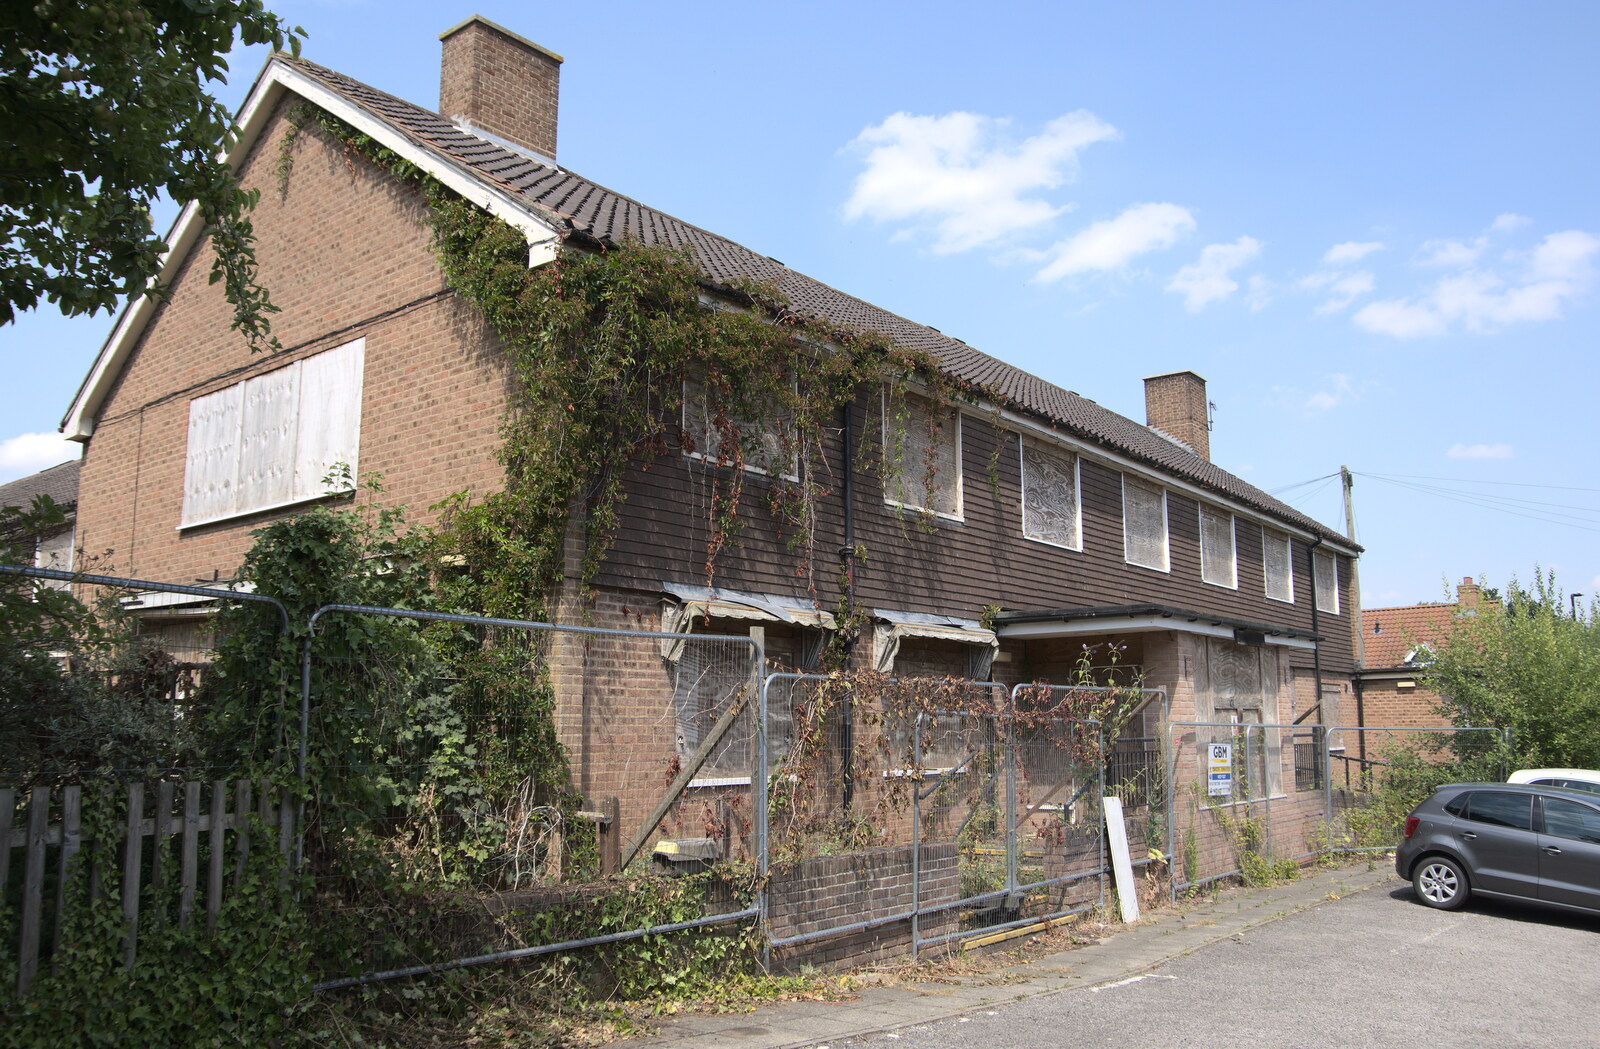 A July Miscellany, Diss, Eye and Norwich - 23rd July 2022: A last look at Paddock House before demolition